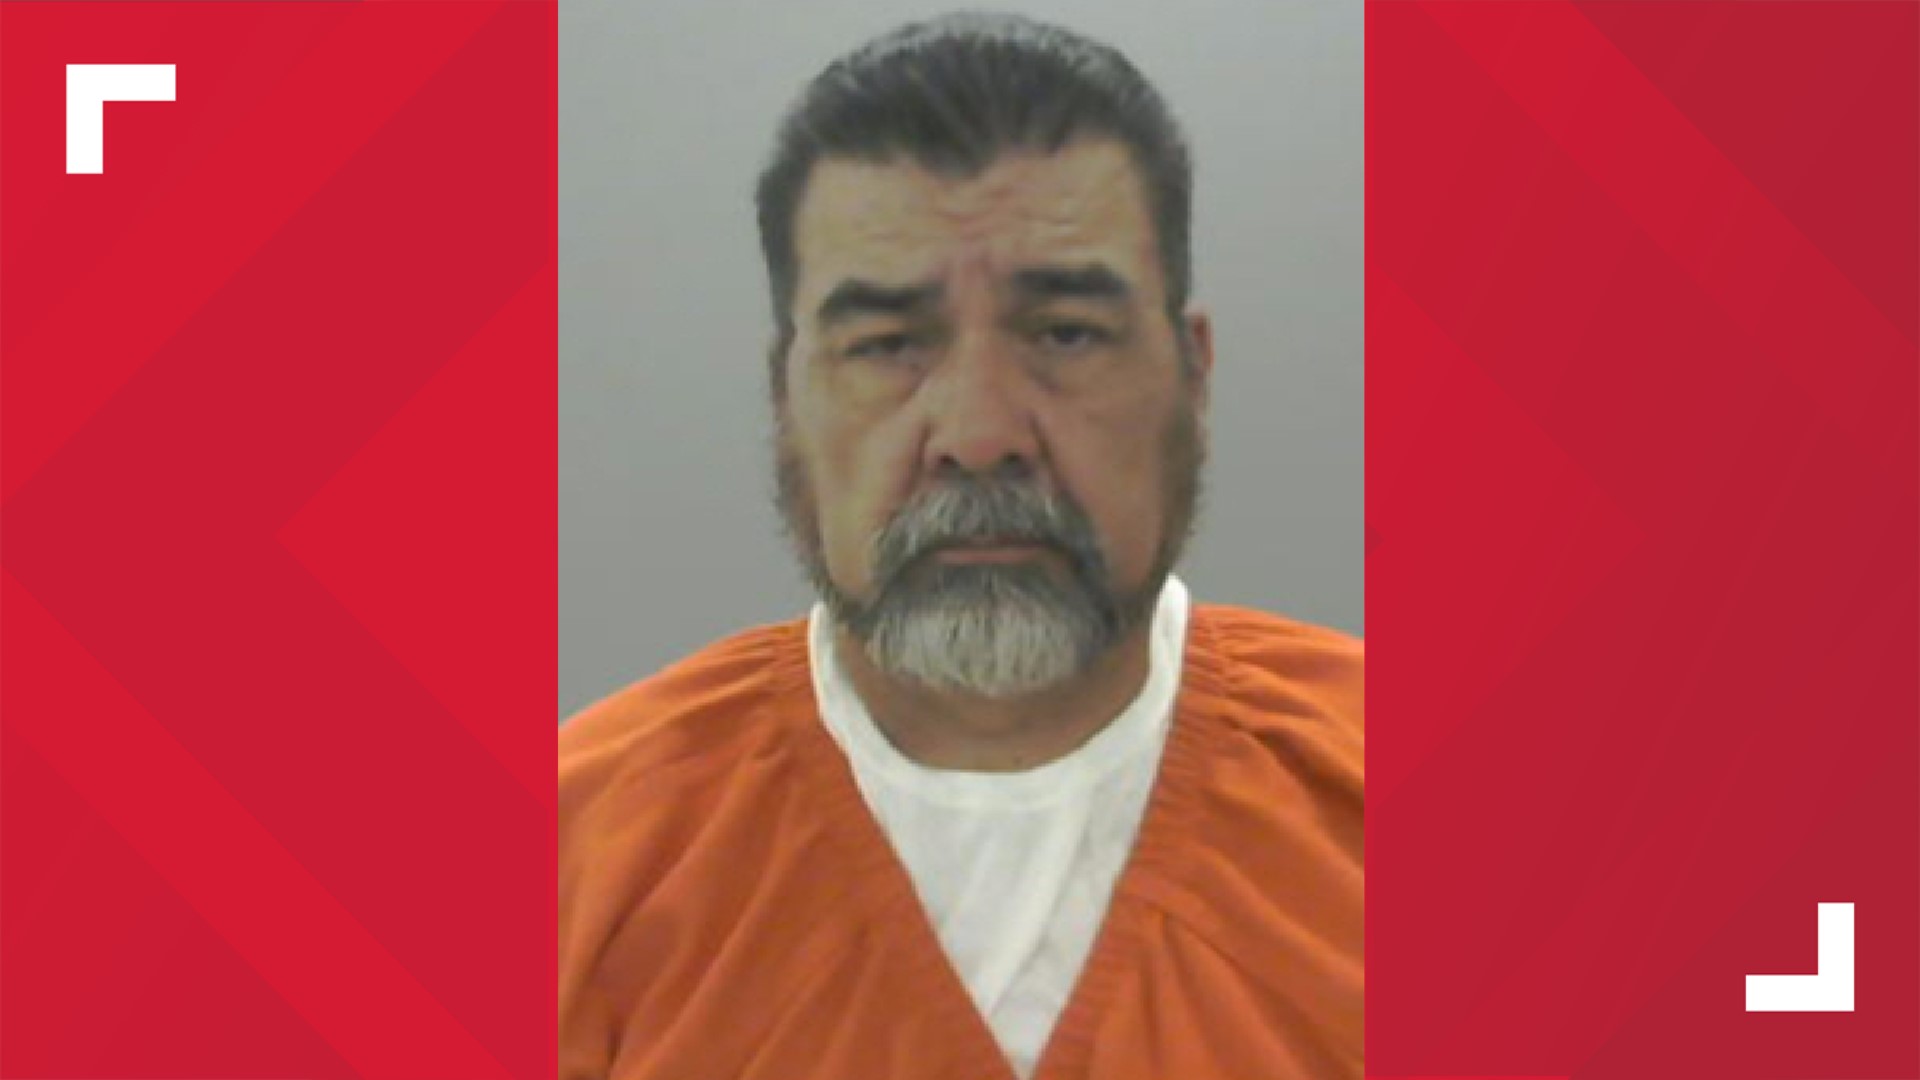 Enrique Gonzalez Irigoyen was charged with aggravated sexual assault and two counts of indecency with a child.